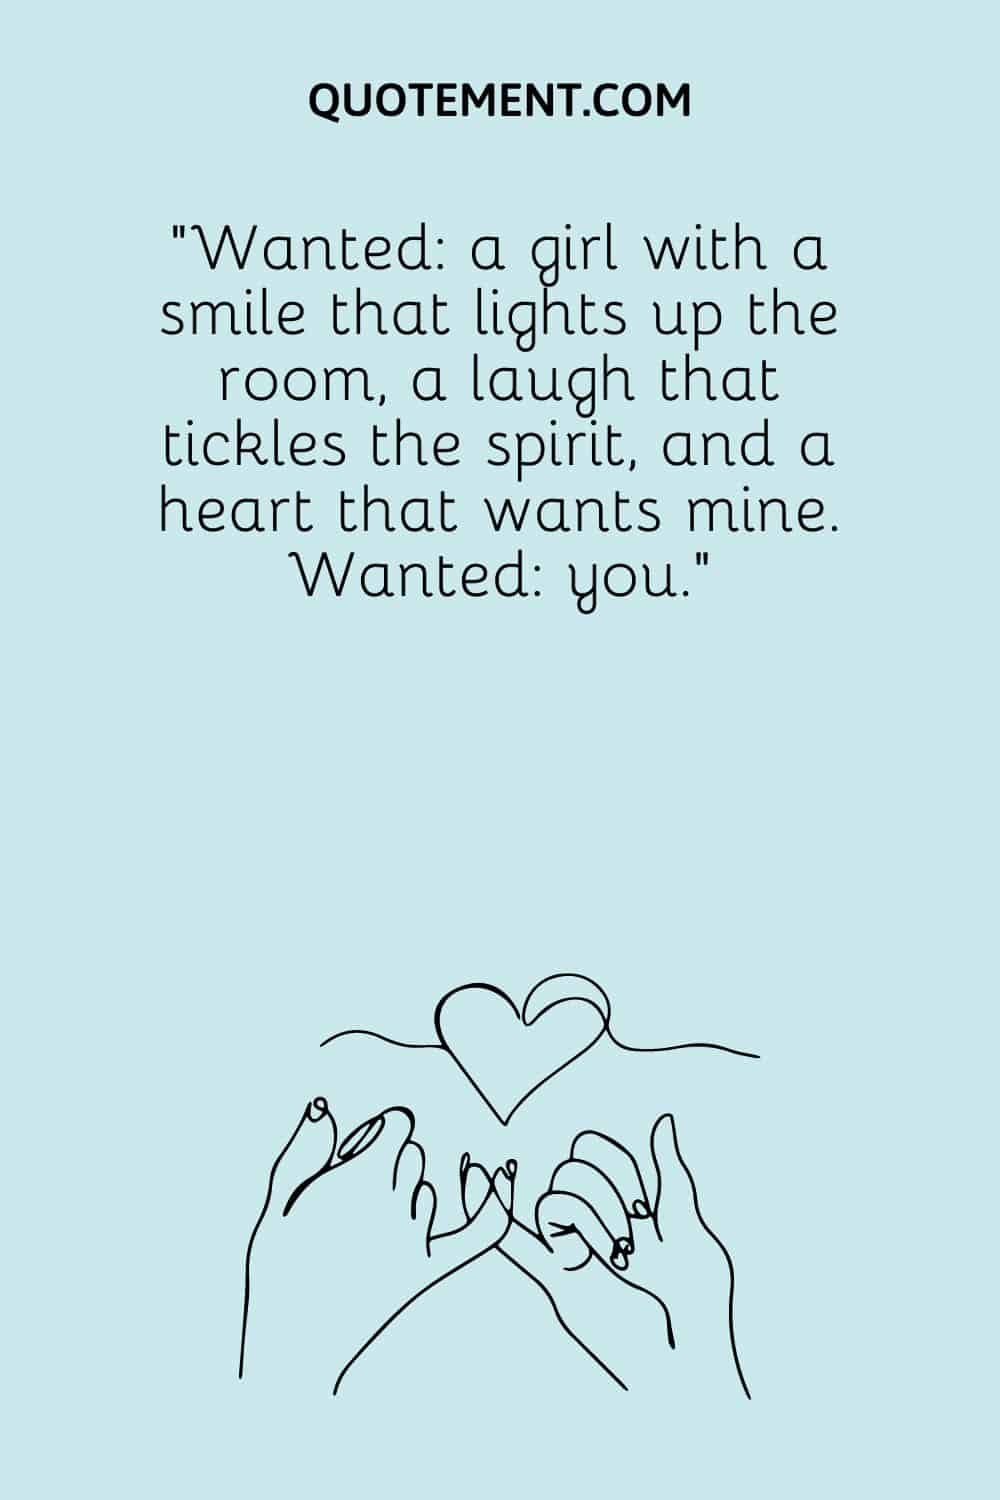 Wanted a girl with a smile that lights up the room, a laugh that tickles the spirit, and a heart that wants mine